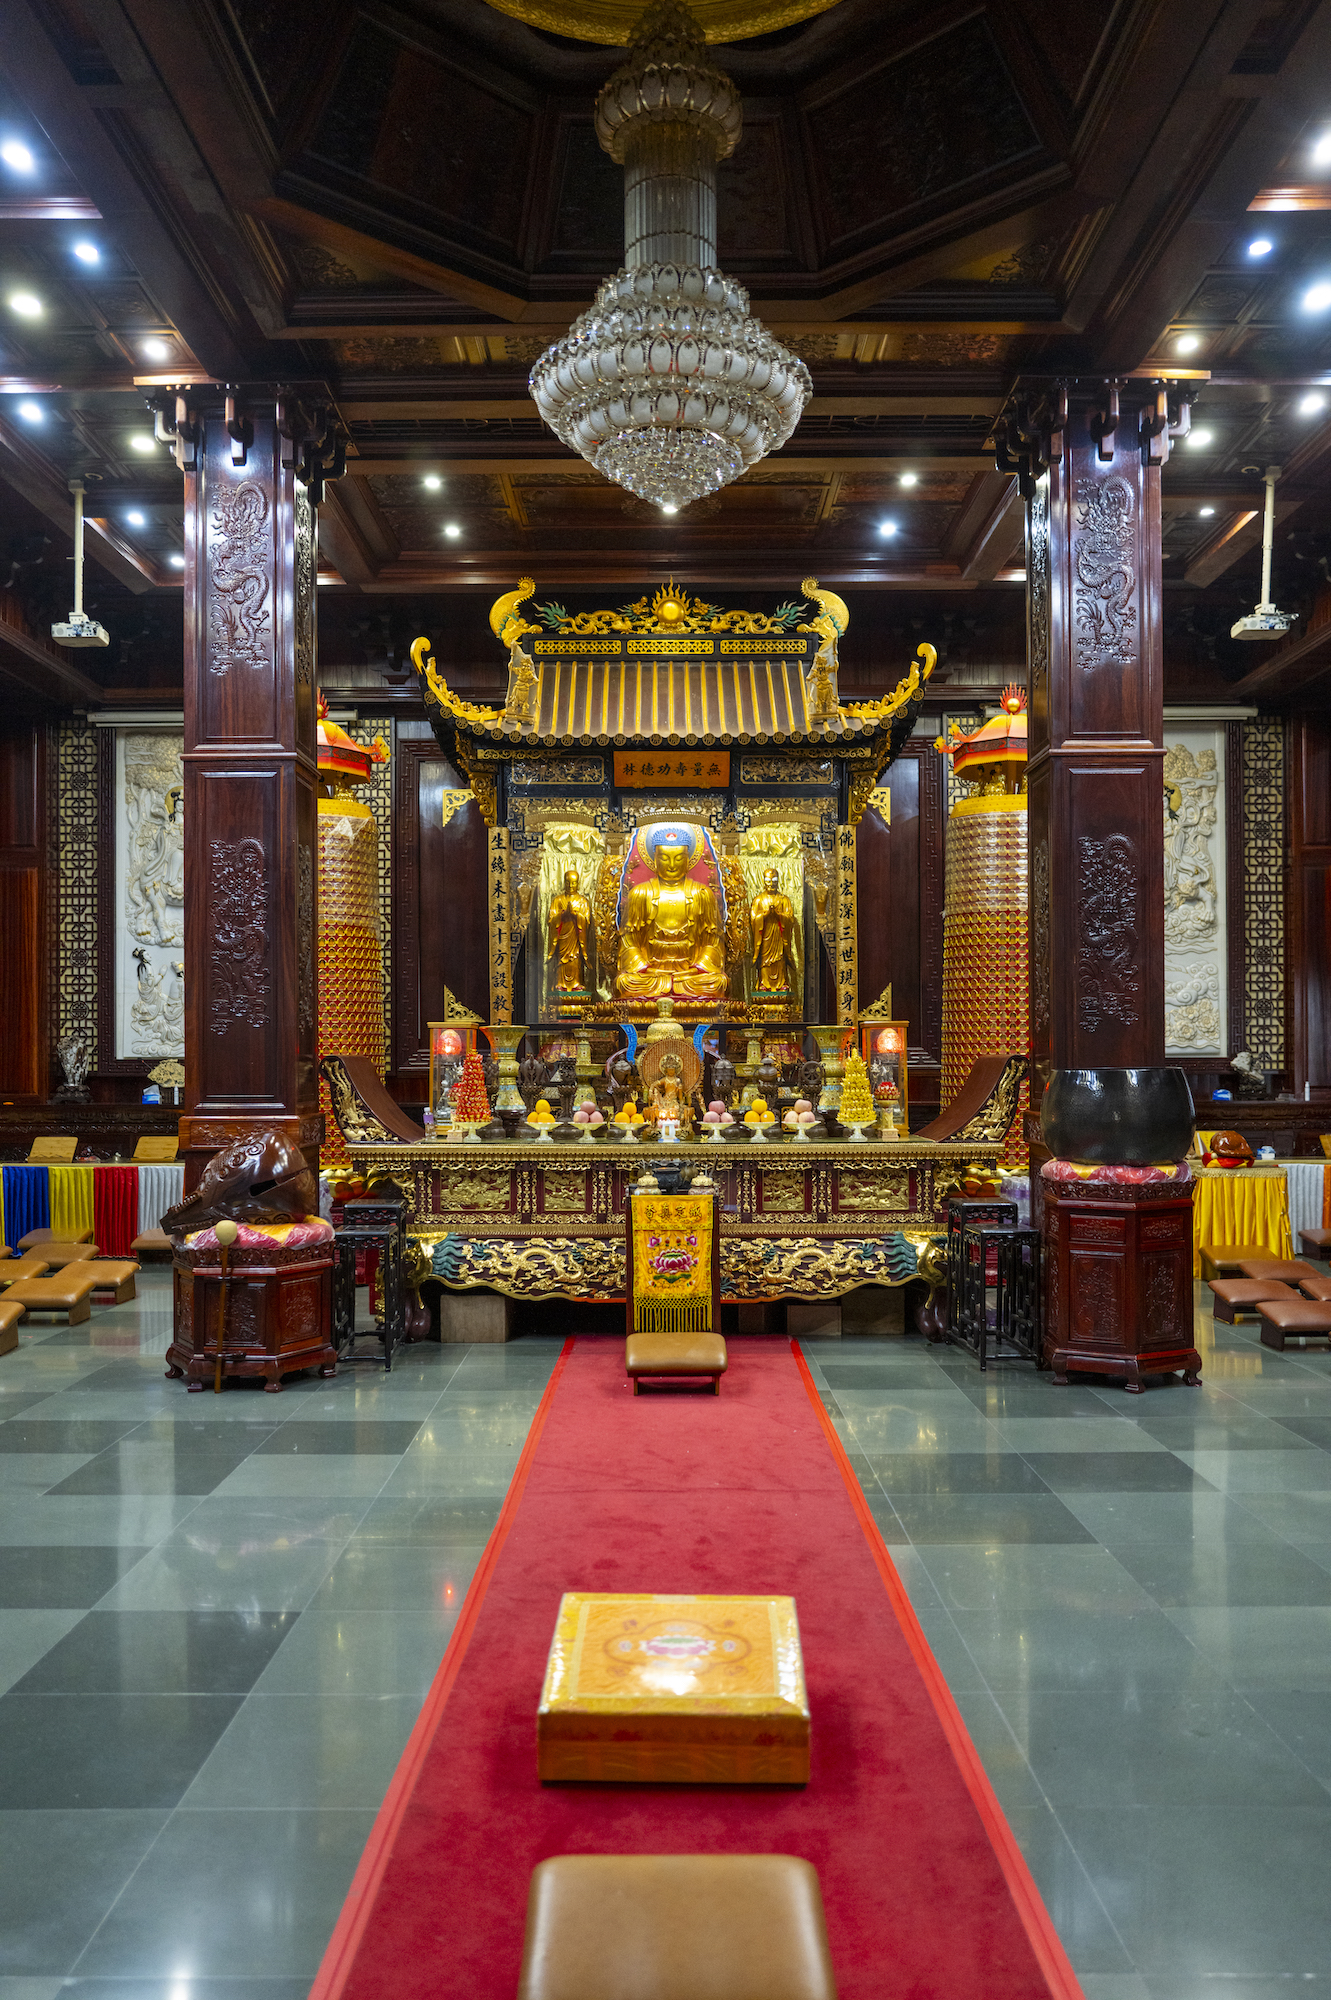 Master Guanben converted his home into Kong Tac Lam Temple nearly a century ago